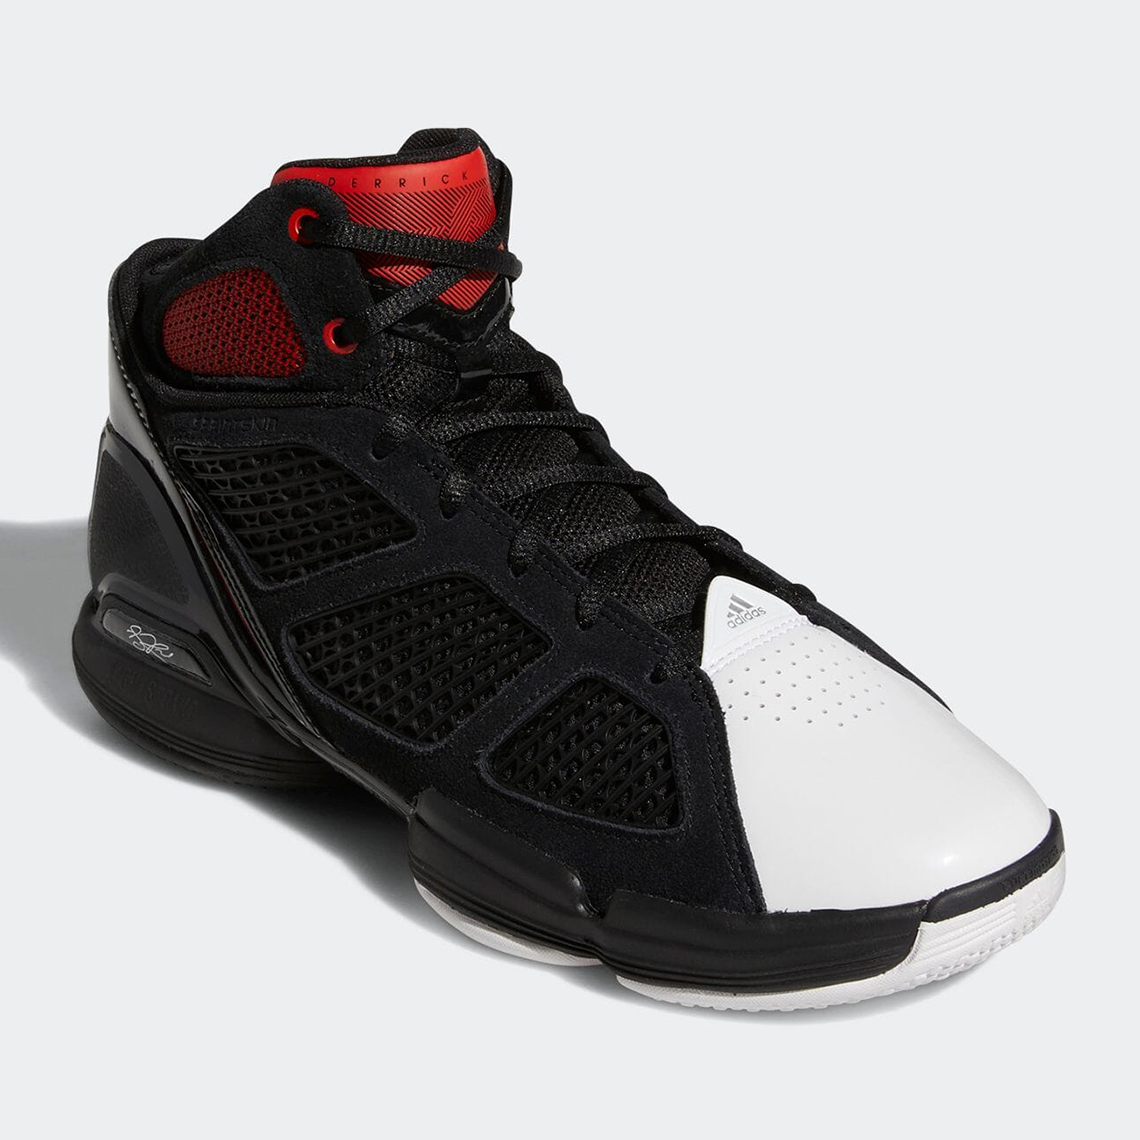 Adidas Drose 1 5 Gy0245 Release Date 2